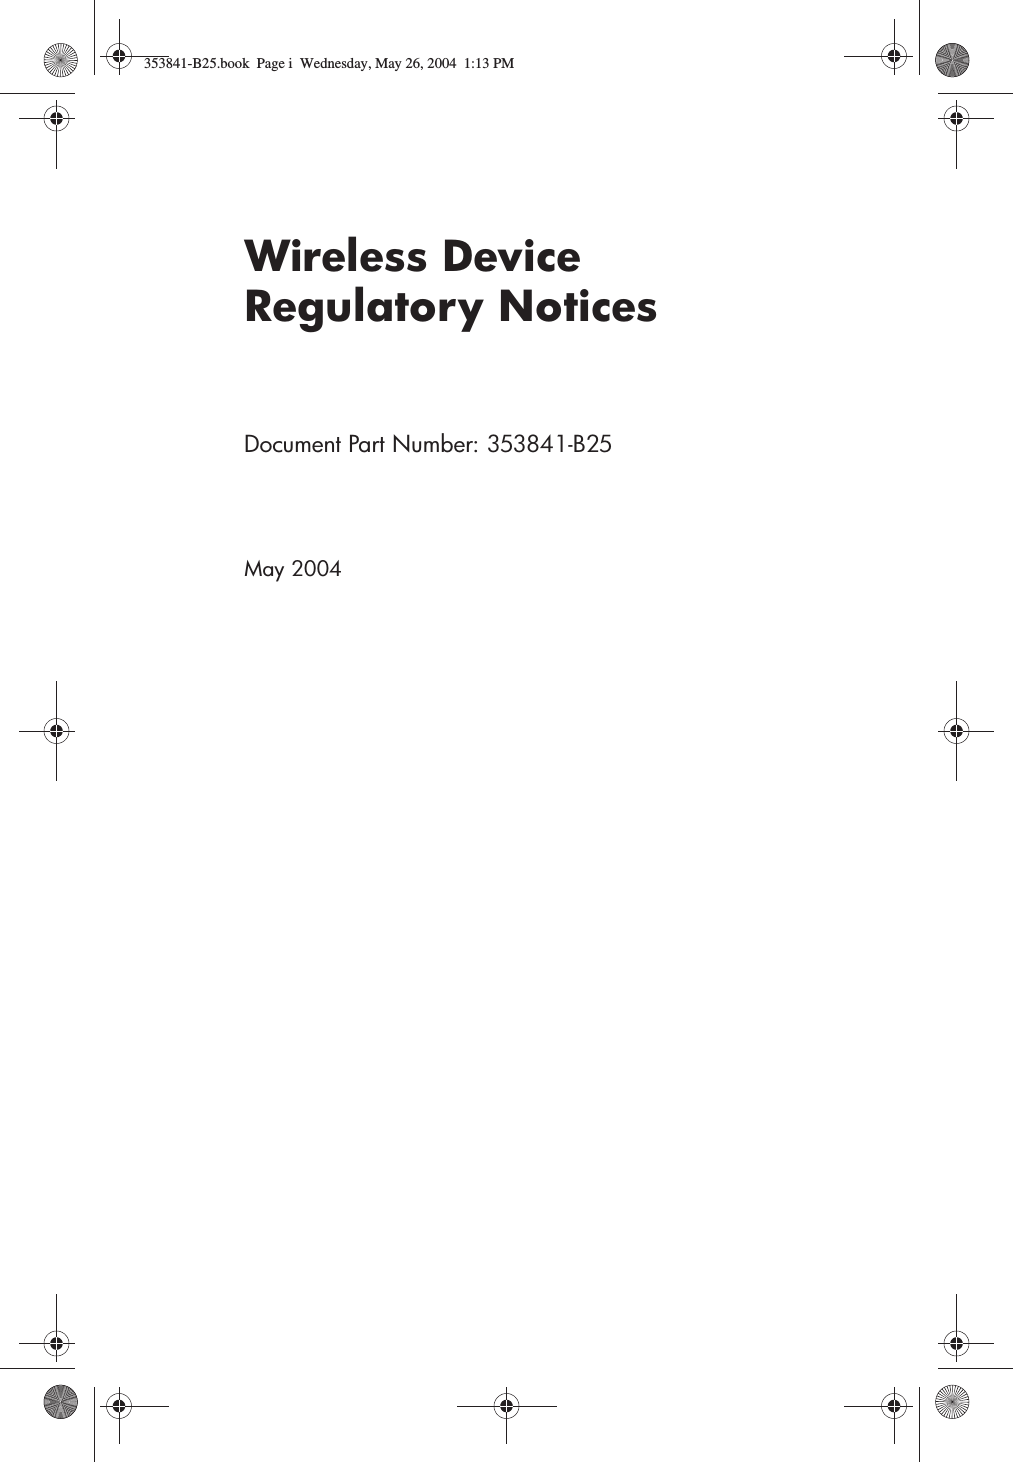 Wireless Device Regulatory NoticesDocument Part Number: 353841-B25May 2004353841-B25.book  Page i  Wednesday, May 26, 2004  1:13 PM